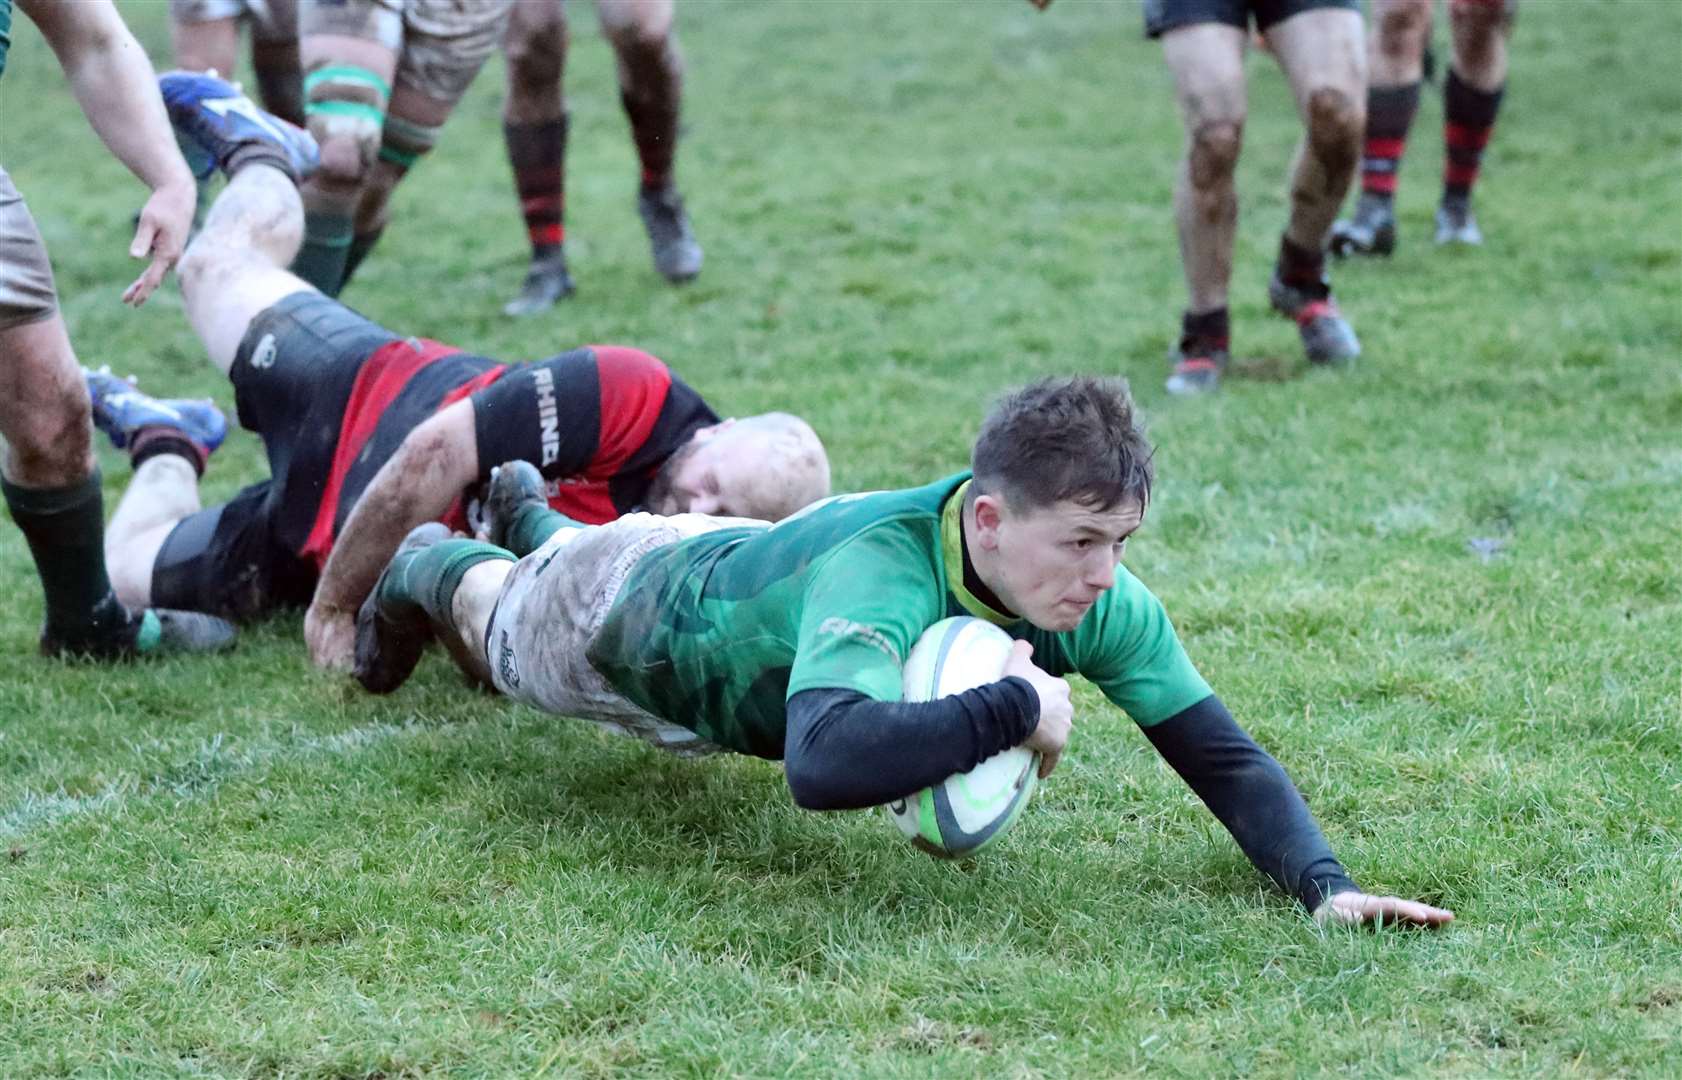 Scott Webster touches down for a try despite being tackled. Picture: James Gunn